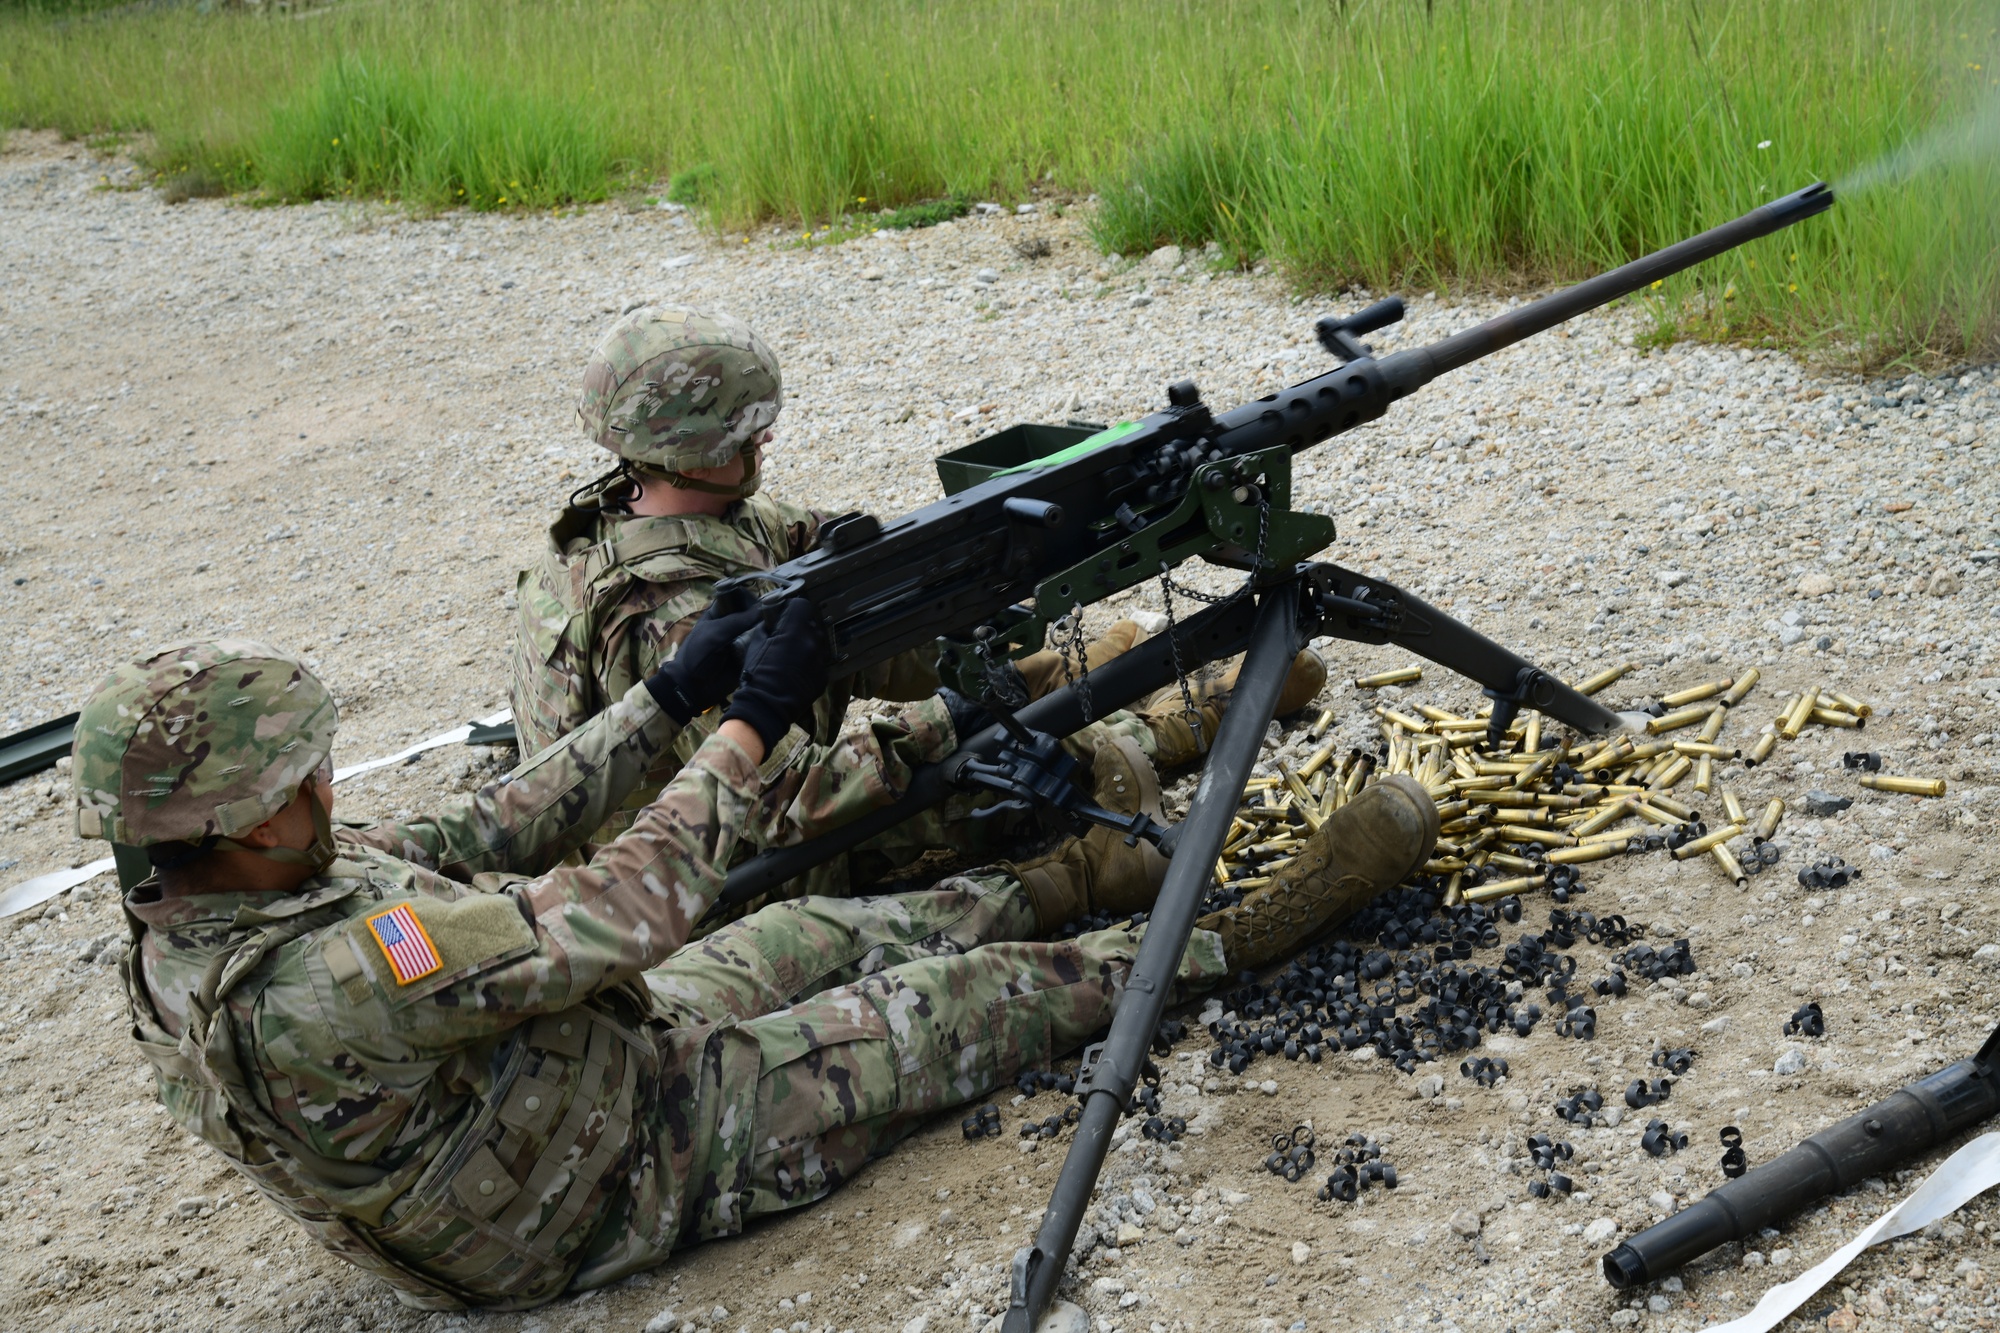 DVIDS - Images - M2A1 .50 Cal Qualification [Image 7 of 7]